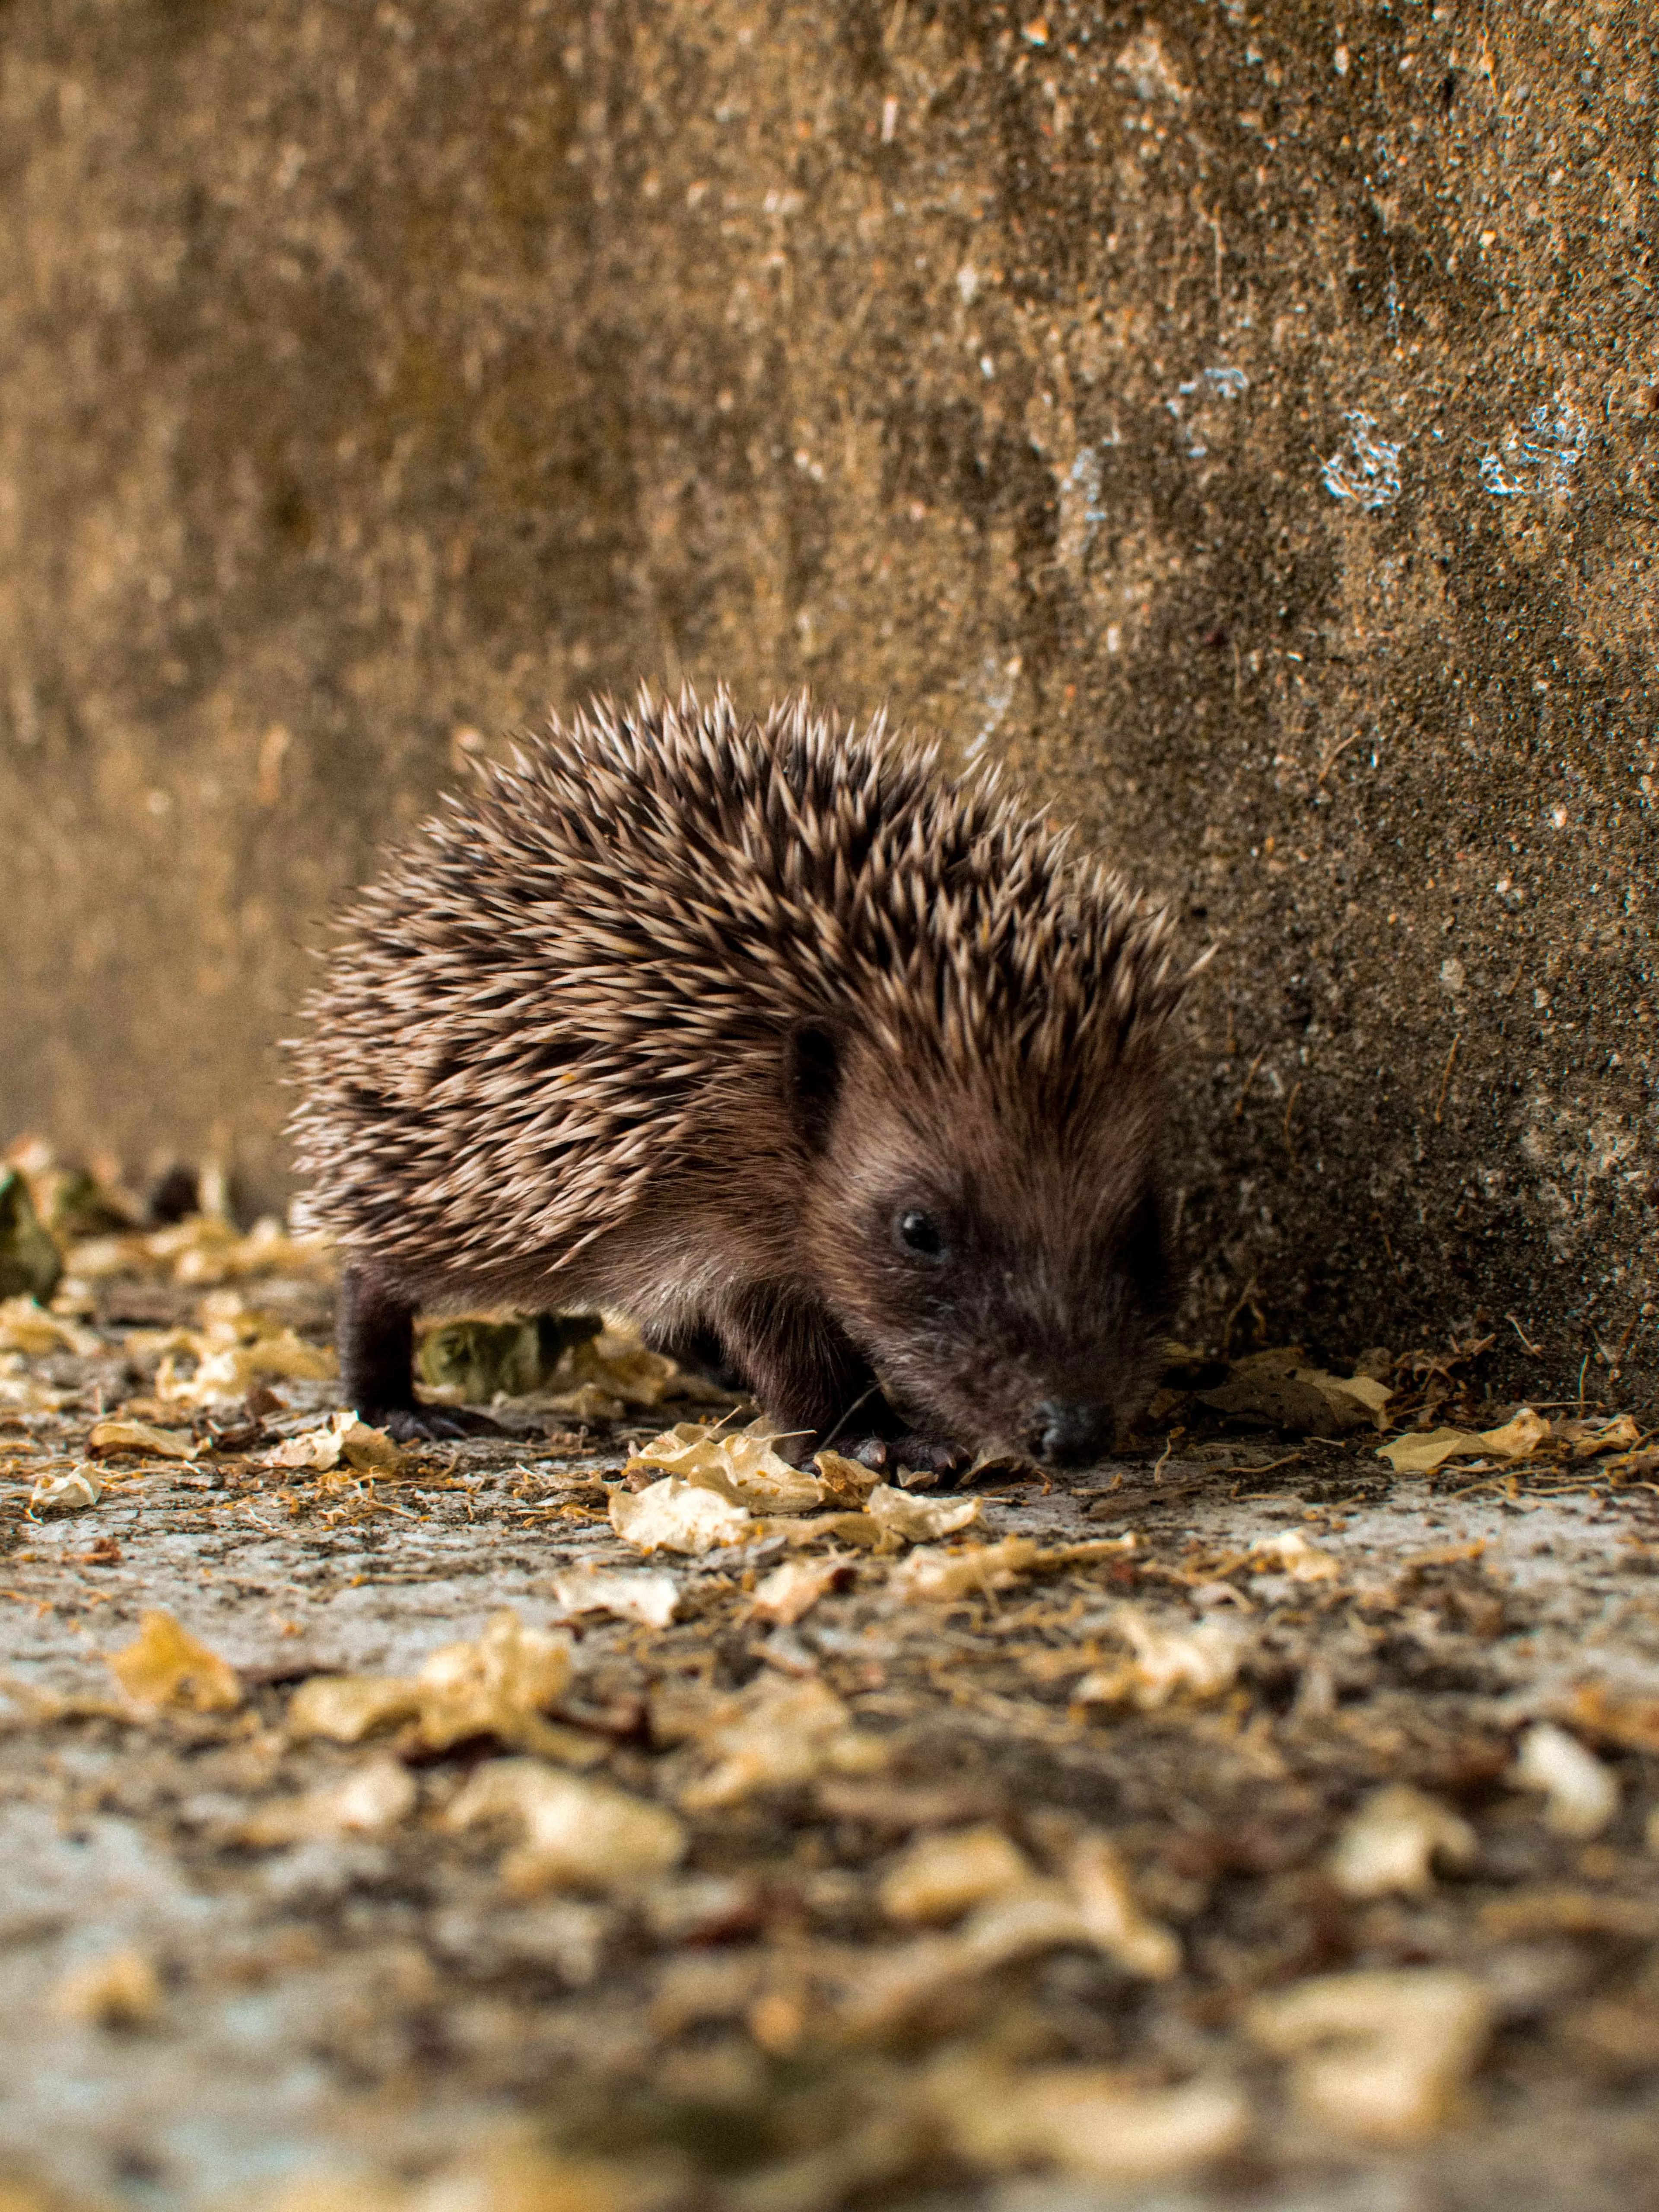 Hedgehogs are at risk of getting caught in the houses (